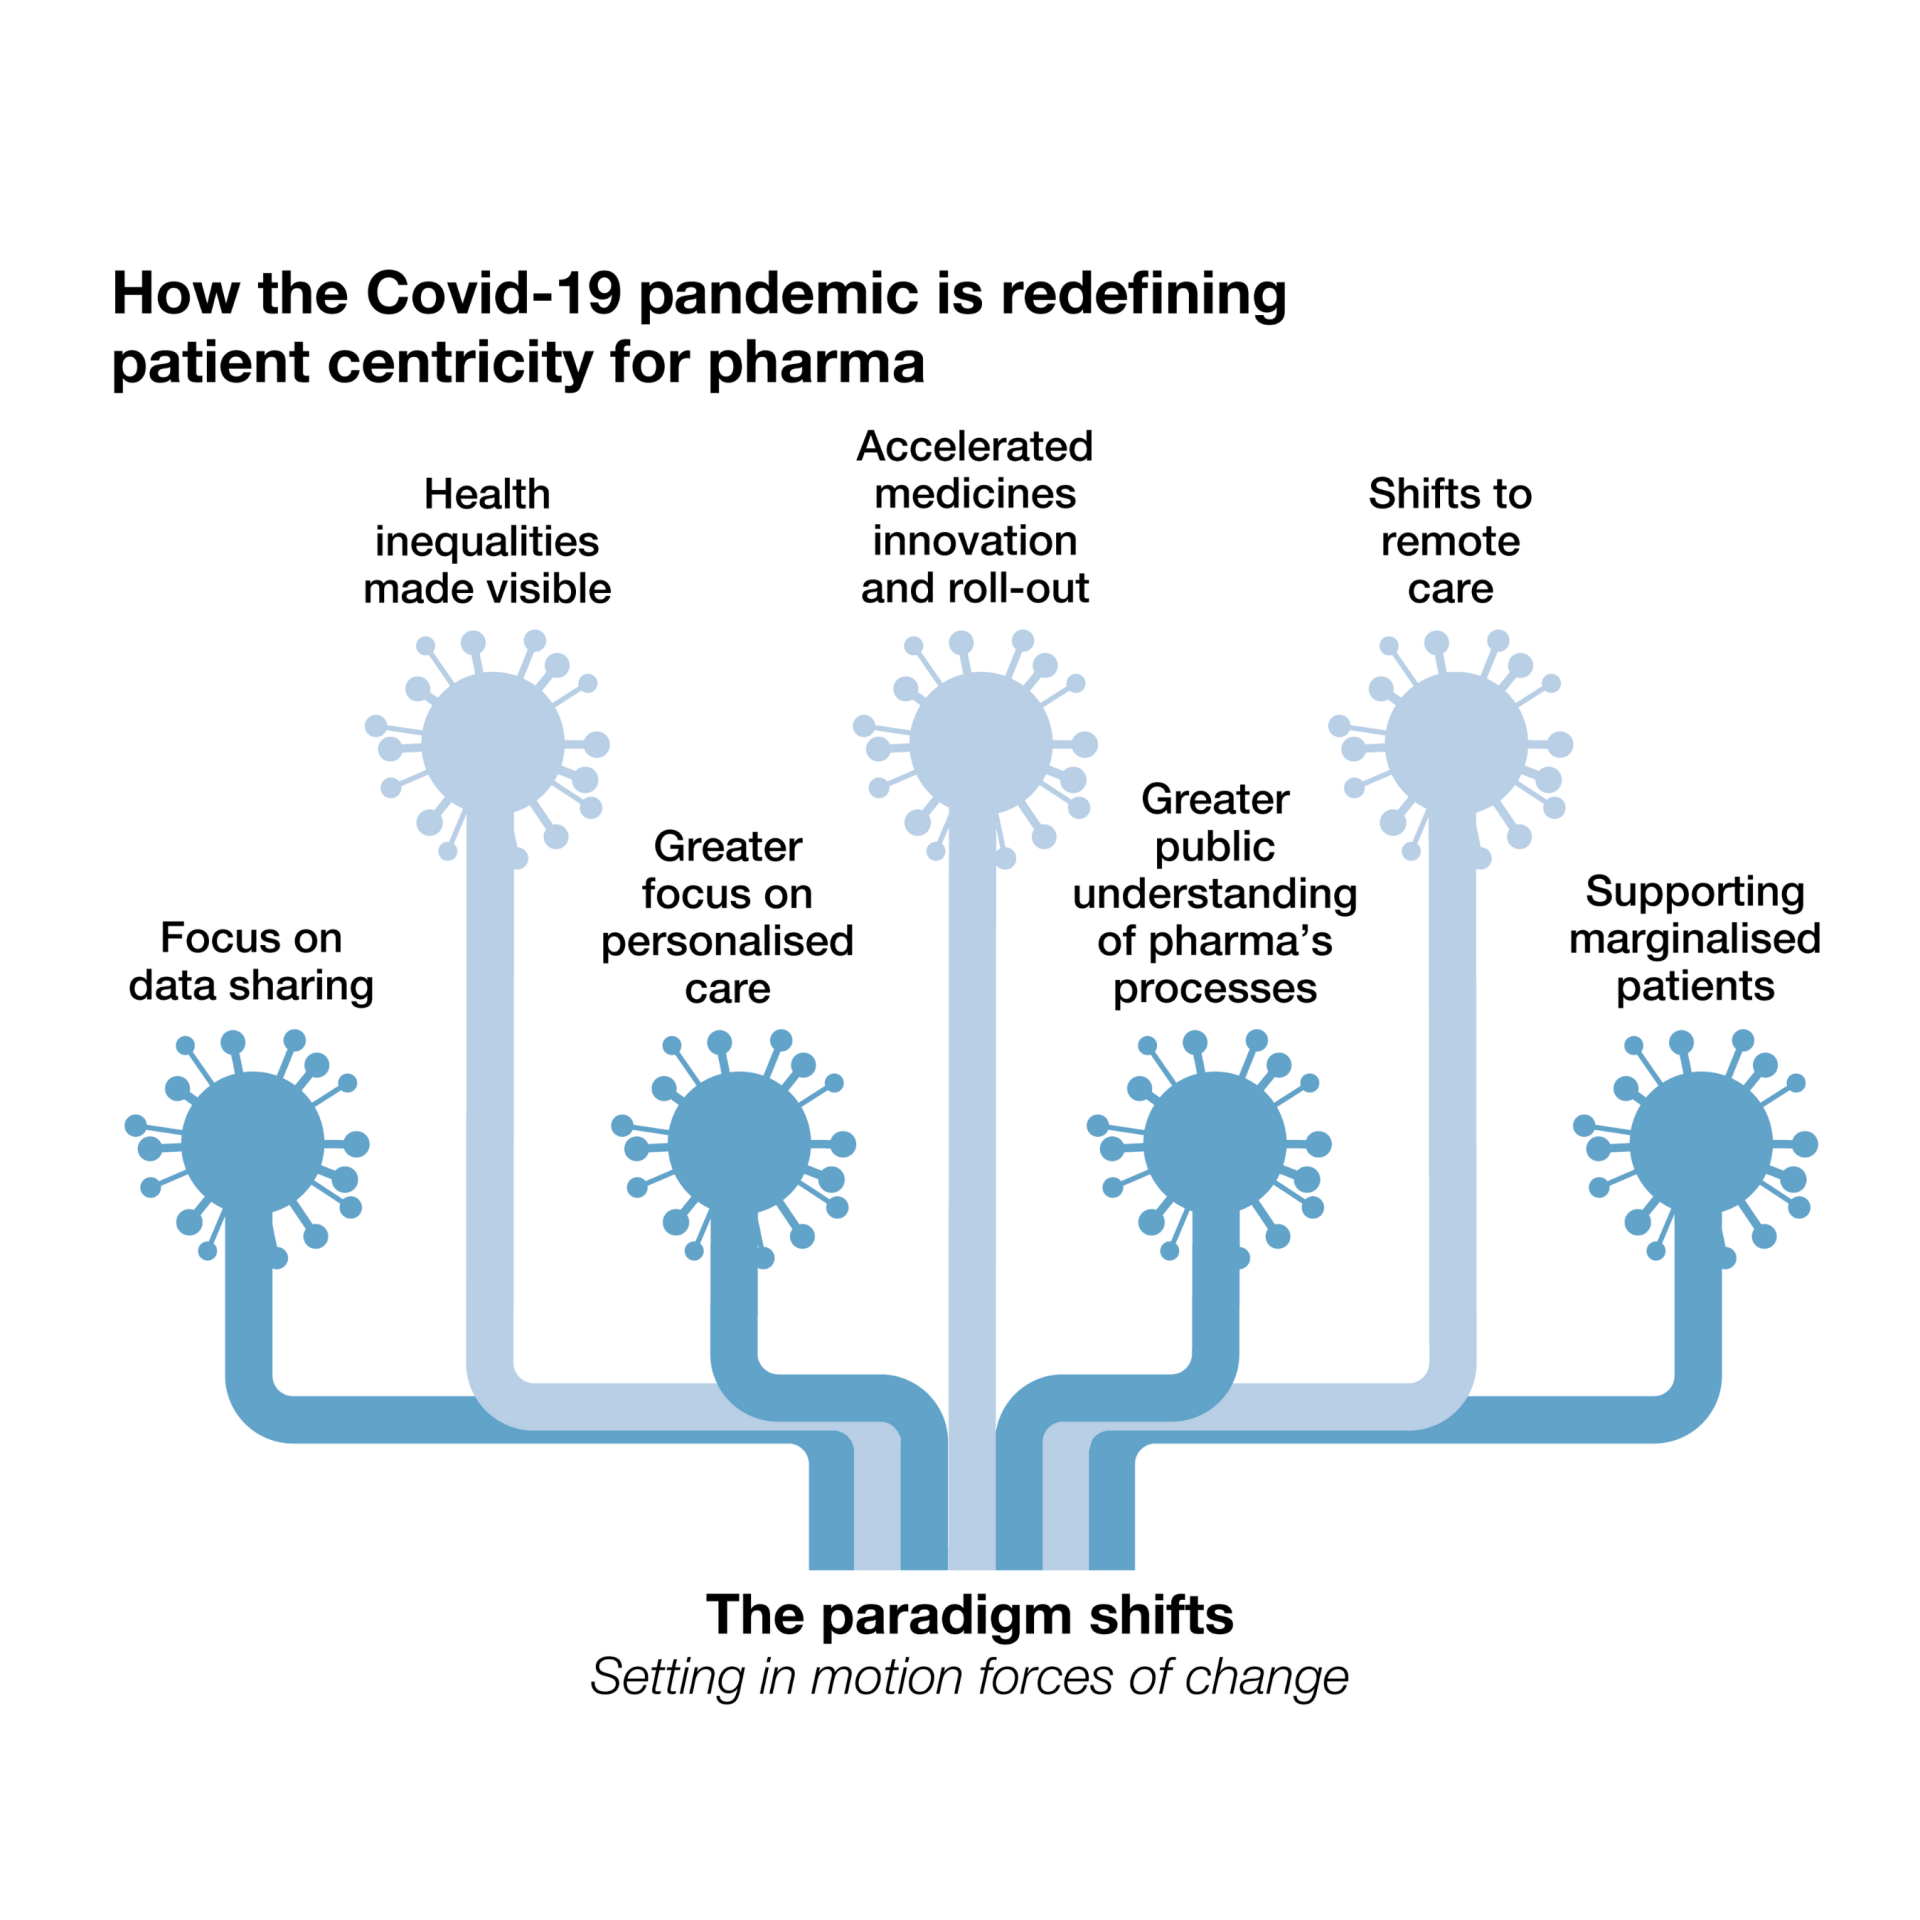 Seven paradigm shifts shaping patient centricity post-pandemic